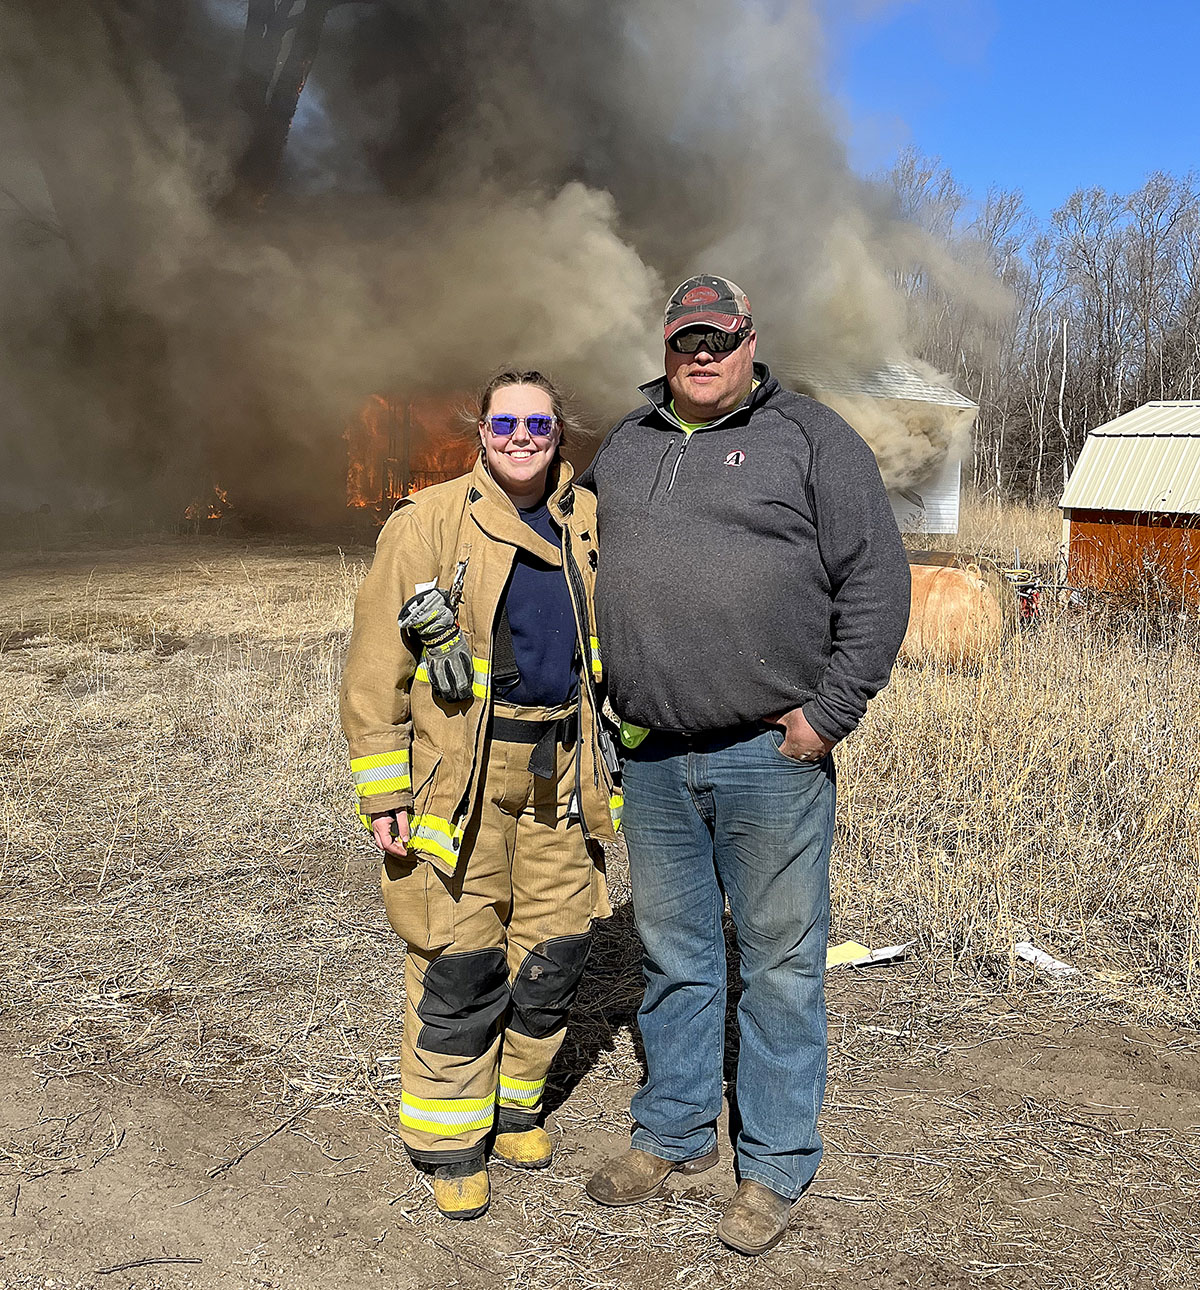 Layce Mayhew and her husband Nathan are both volunteer firefighters with Wood River Fire and Rescue. They’re pictured during a controlled burn. (Courtesy photo)